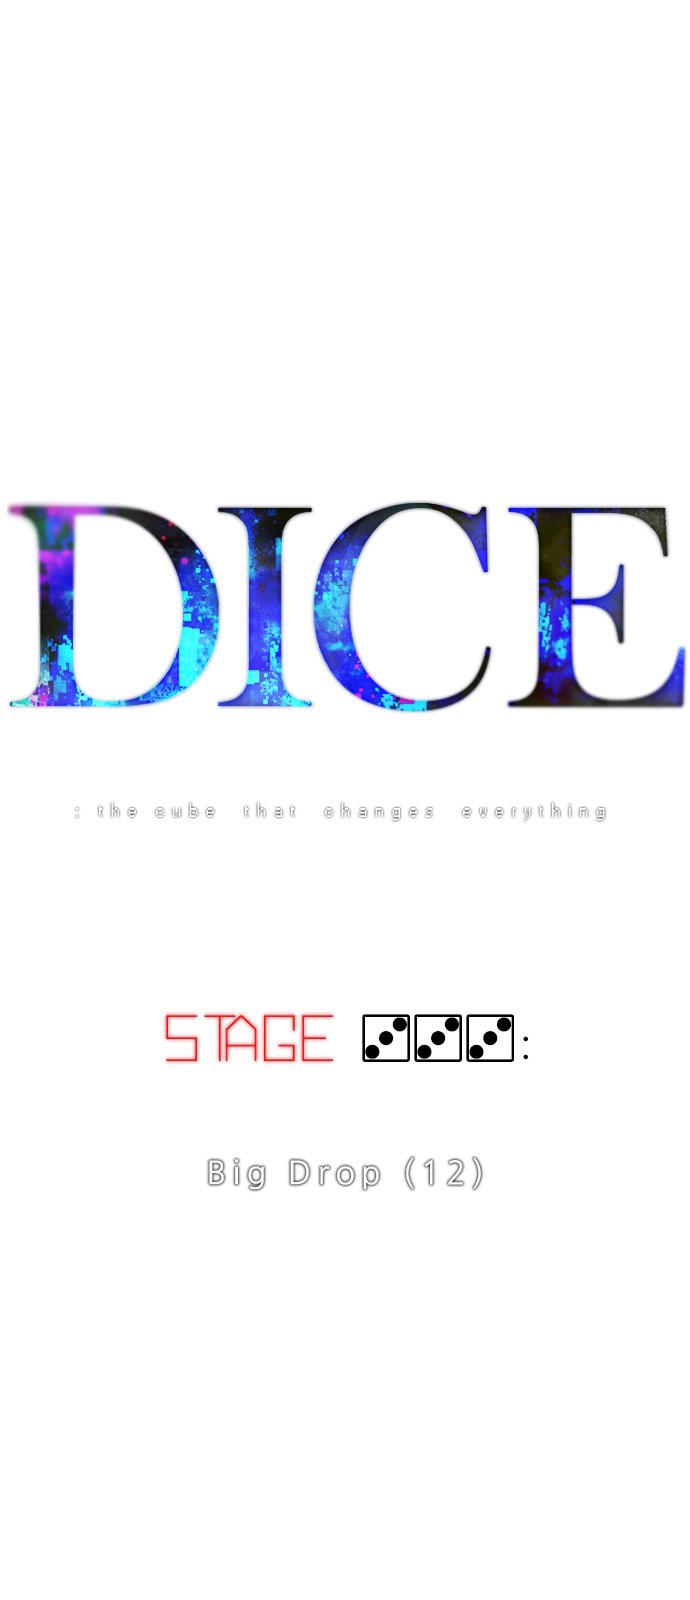 DICE: The Cube That Changes Everything Ch. 333 Big Drop (12)